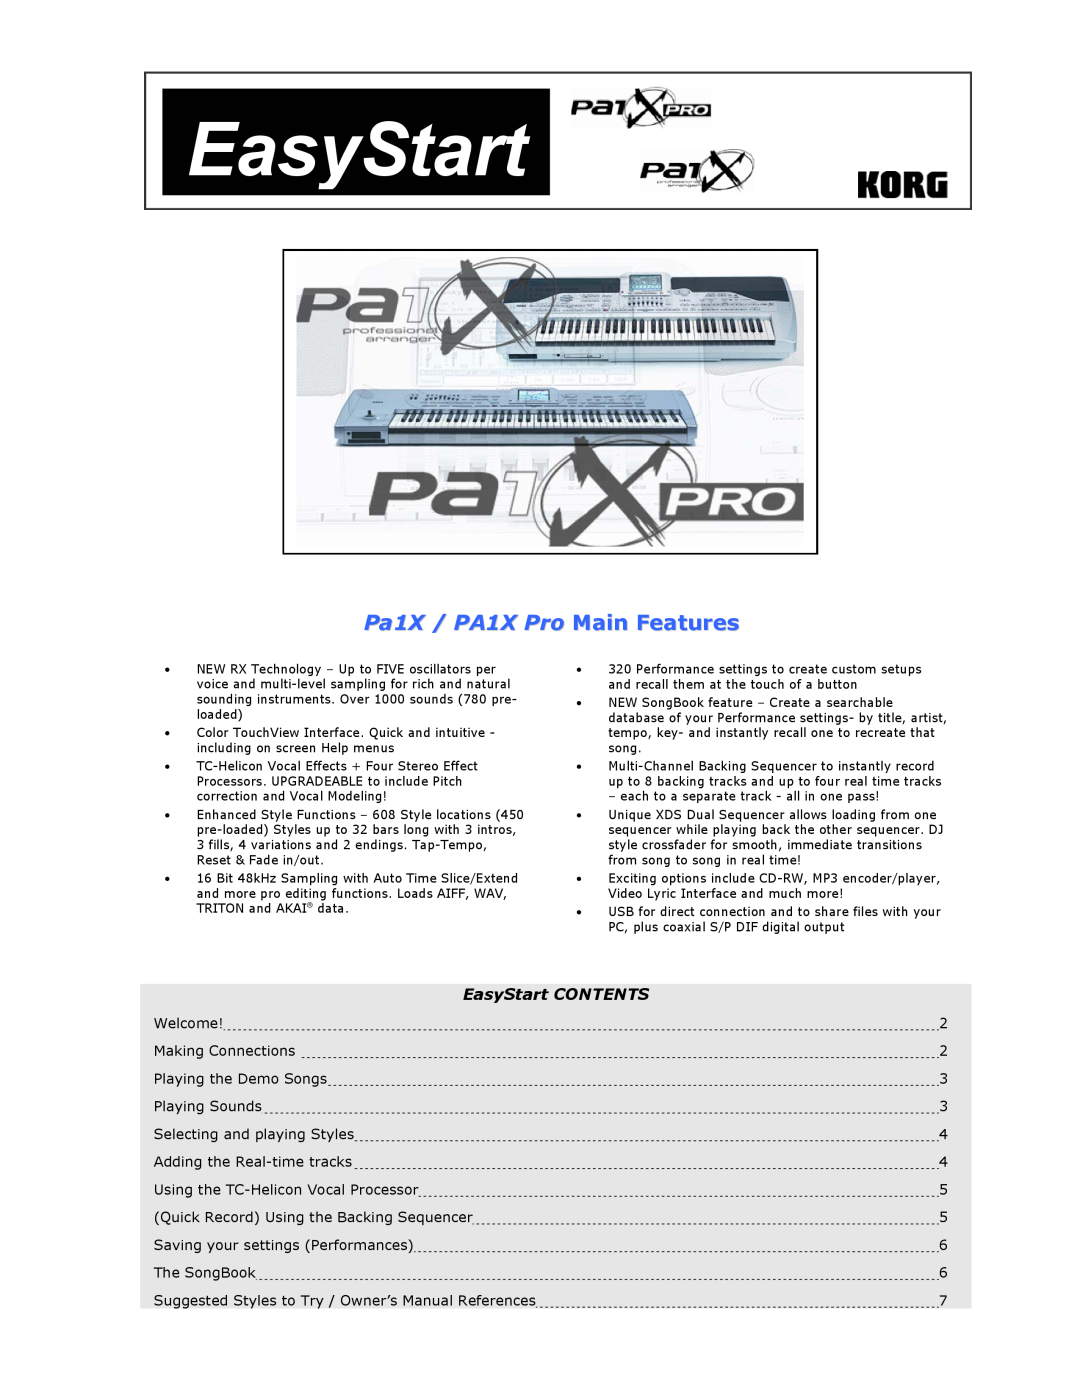 Korg owner manual Pa1X / PA1X Pro Main Features, EasyStart CONTENTS 